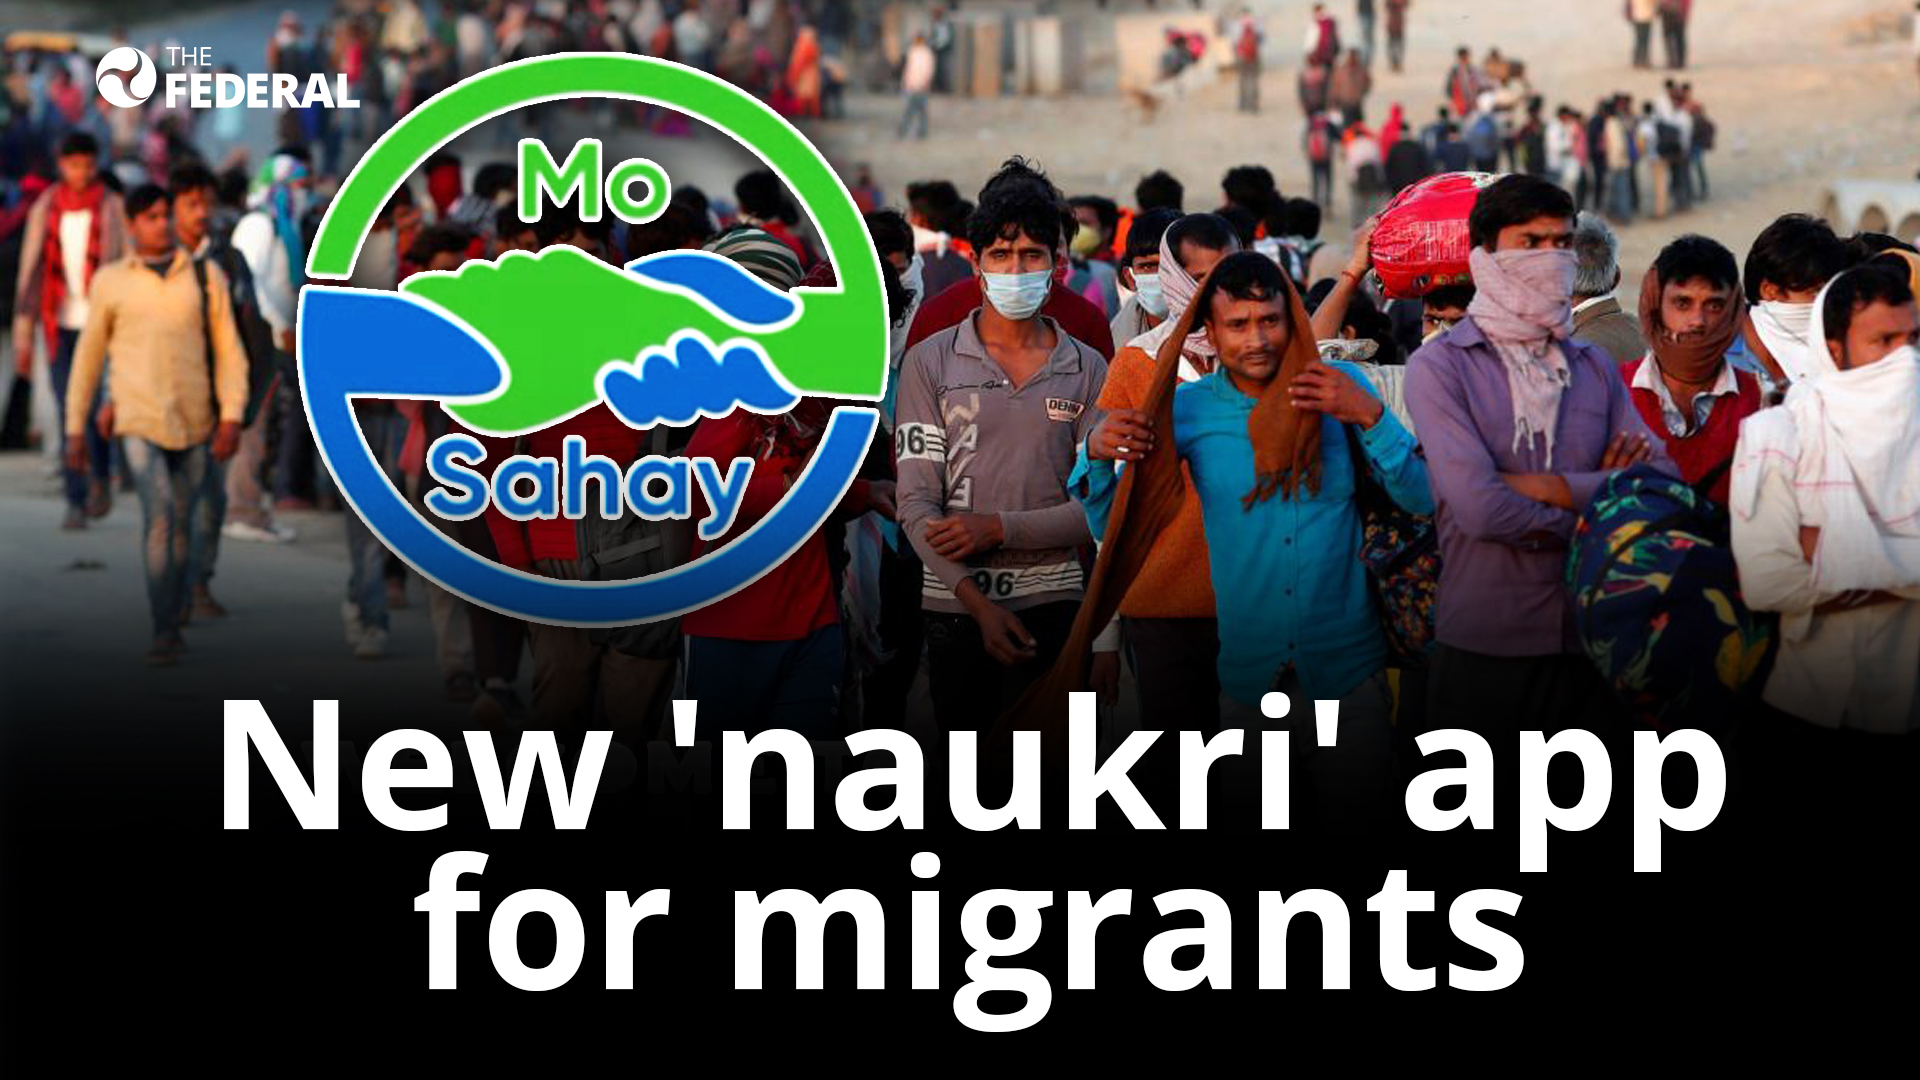 Mo Sahay, the new naukri app for migrant labourers by IIT